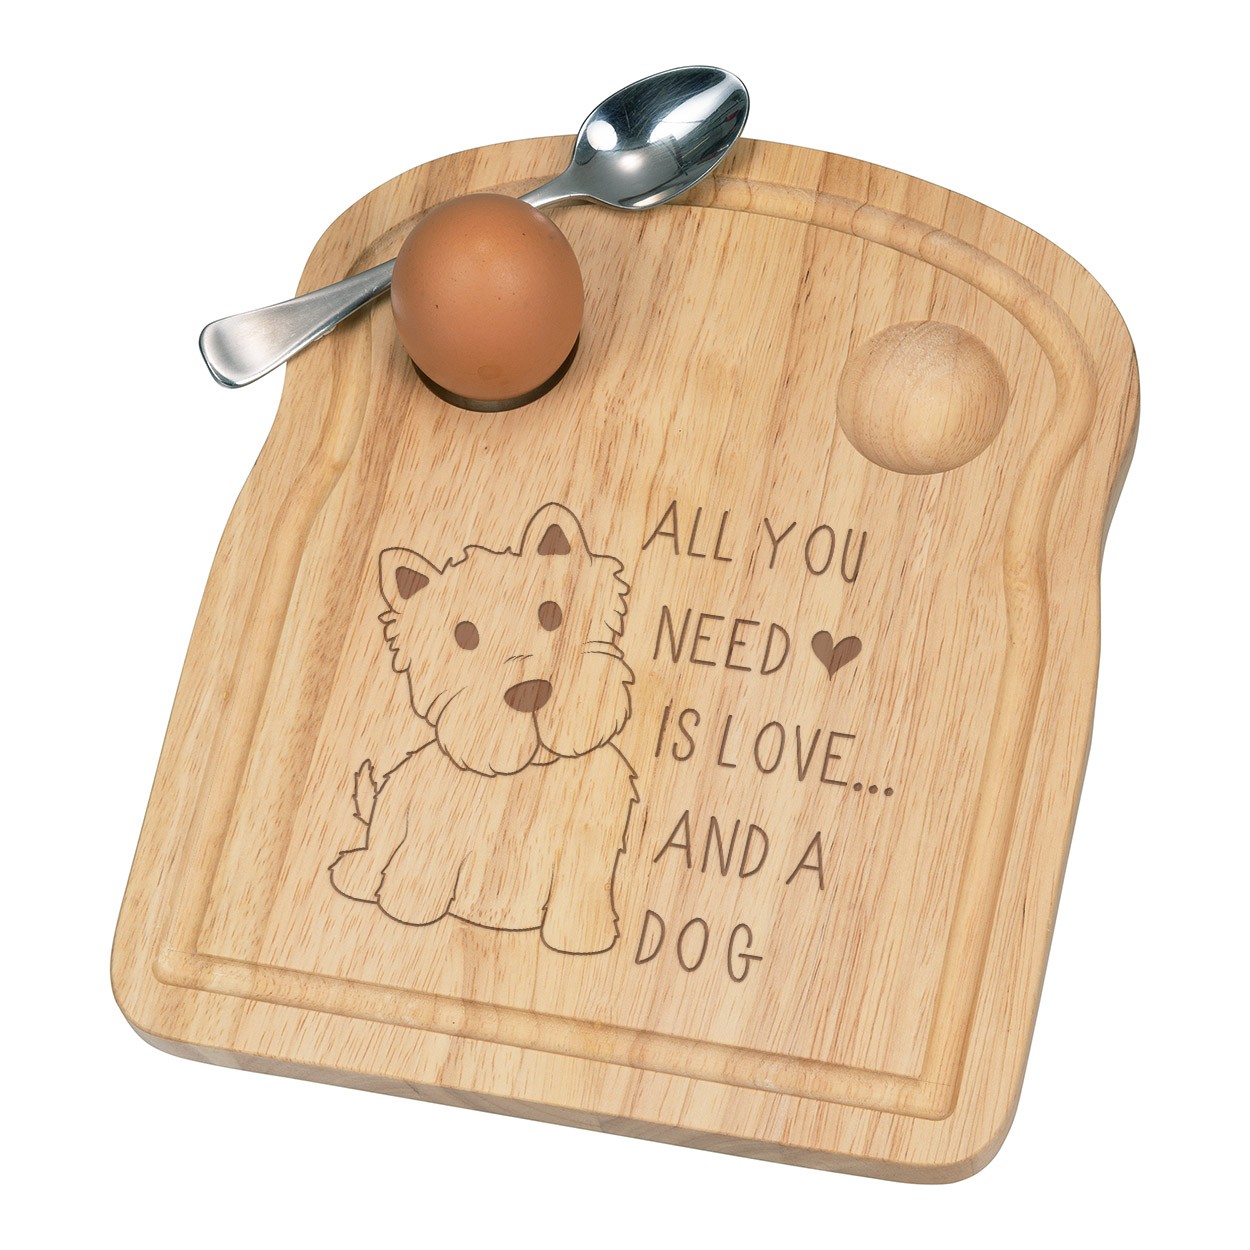 All You Need Is Love And A Dog Breakfast Dippy Egg Cup Board Wooden